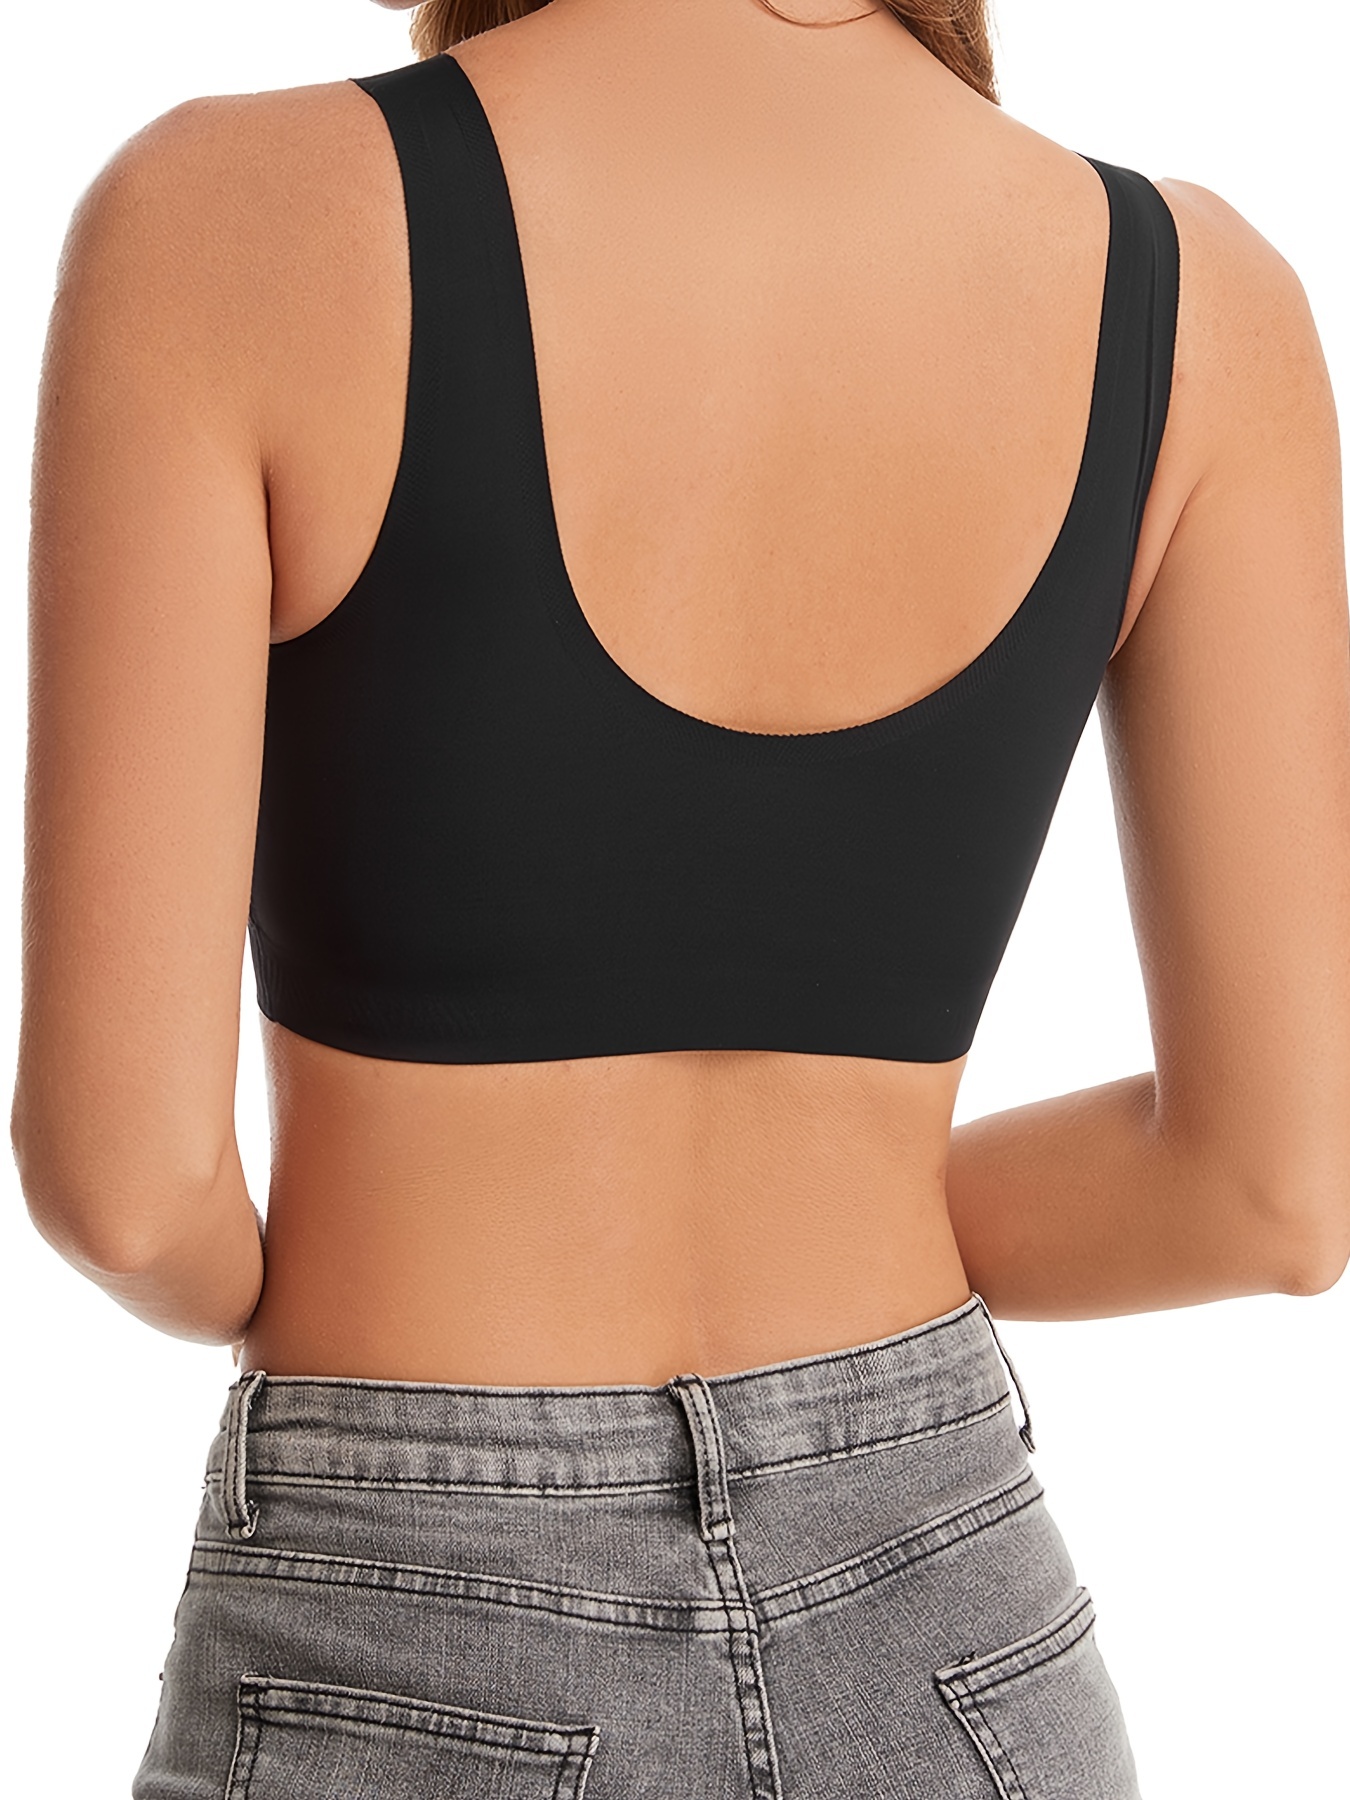 2pcs/Set Non-Wired, Seamless, Push Up & Invisible Sports Bra With